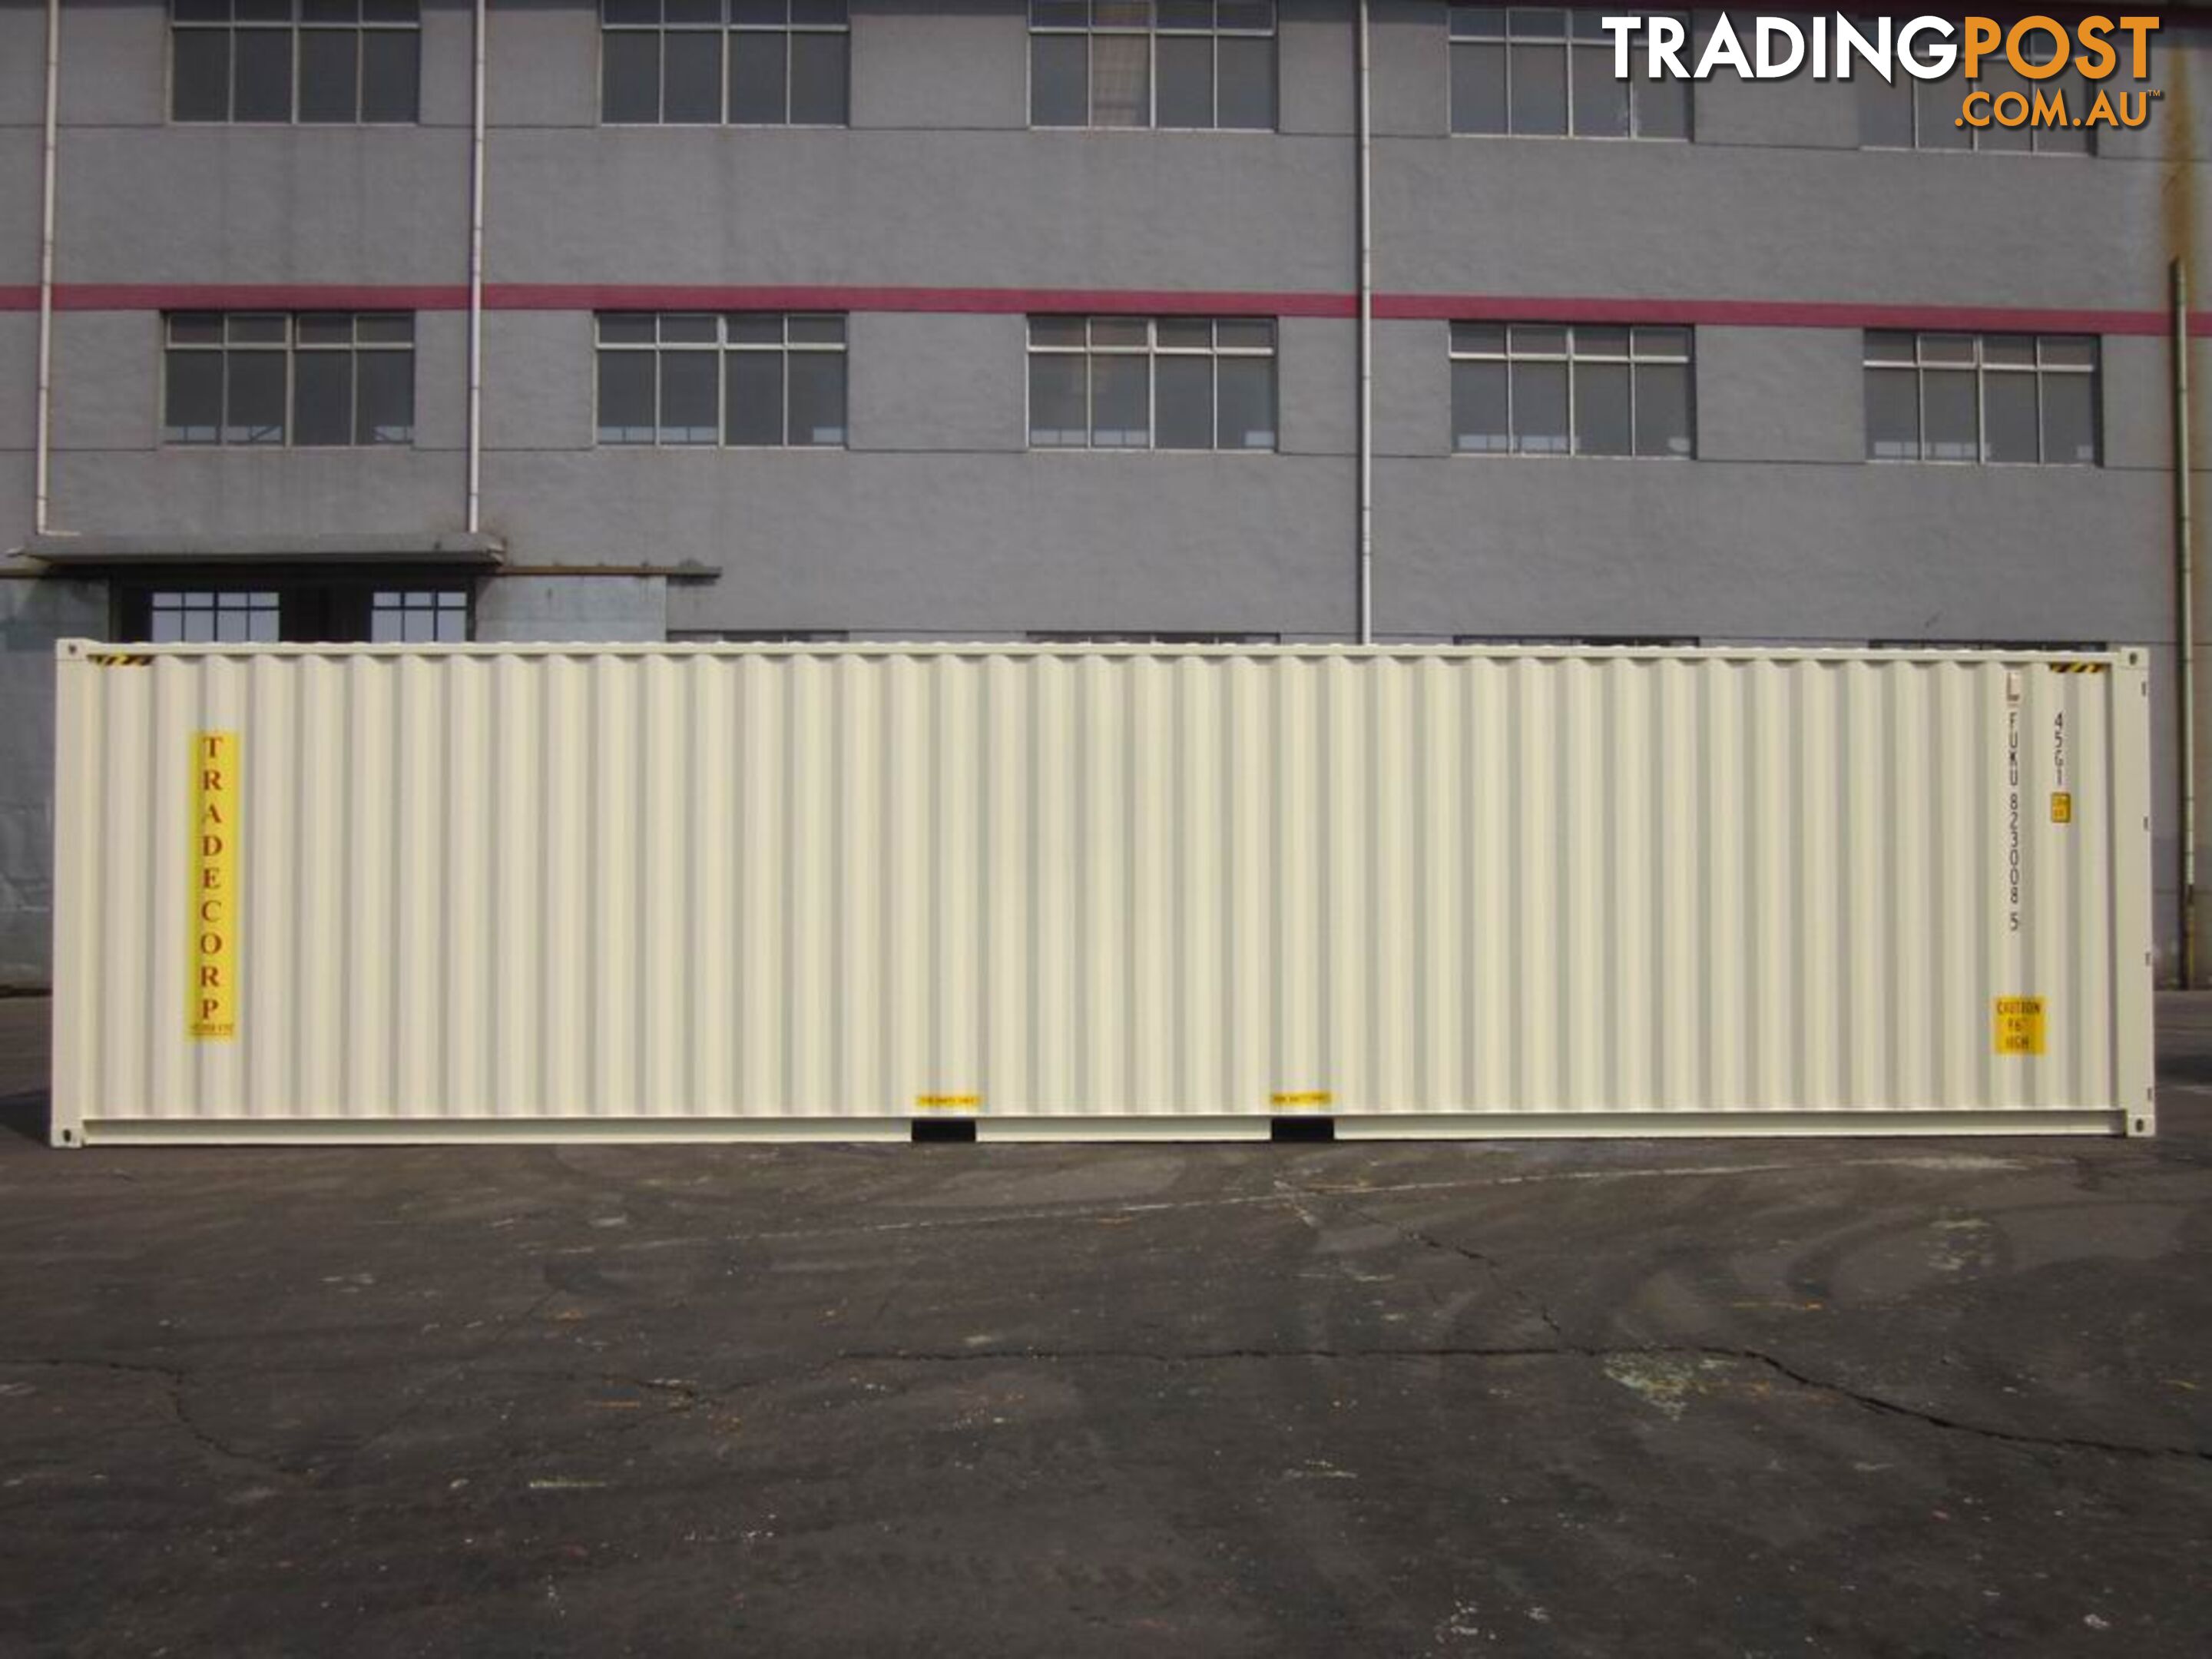 New 40ft High Cube Shipping Containers Uralla - From $7950 + GST